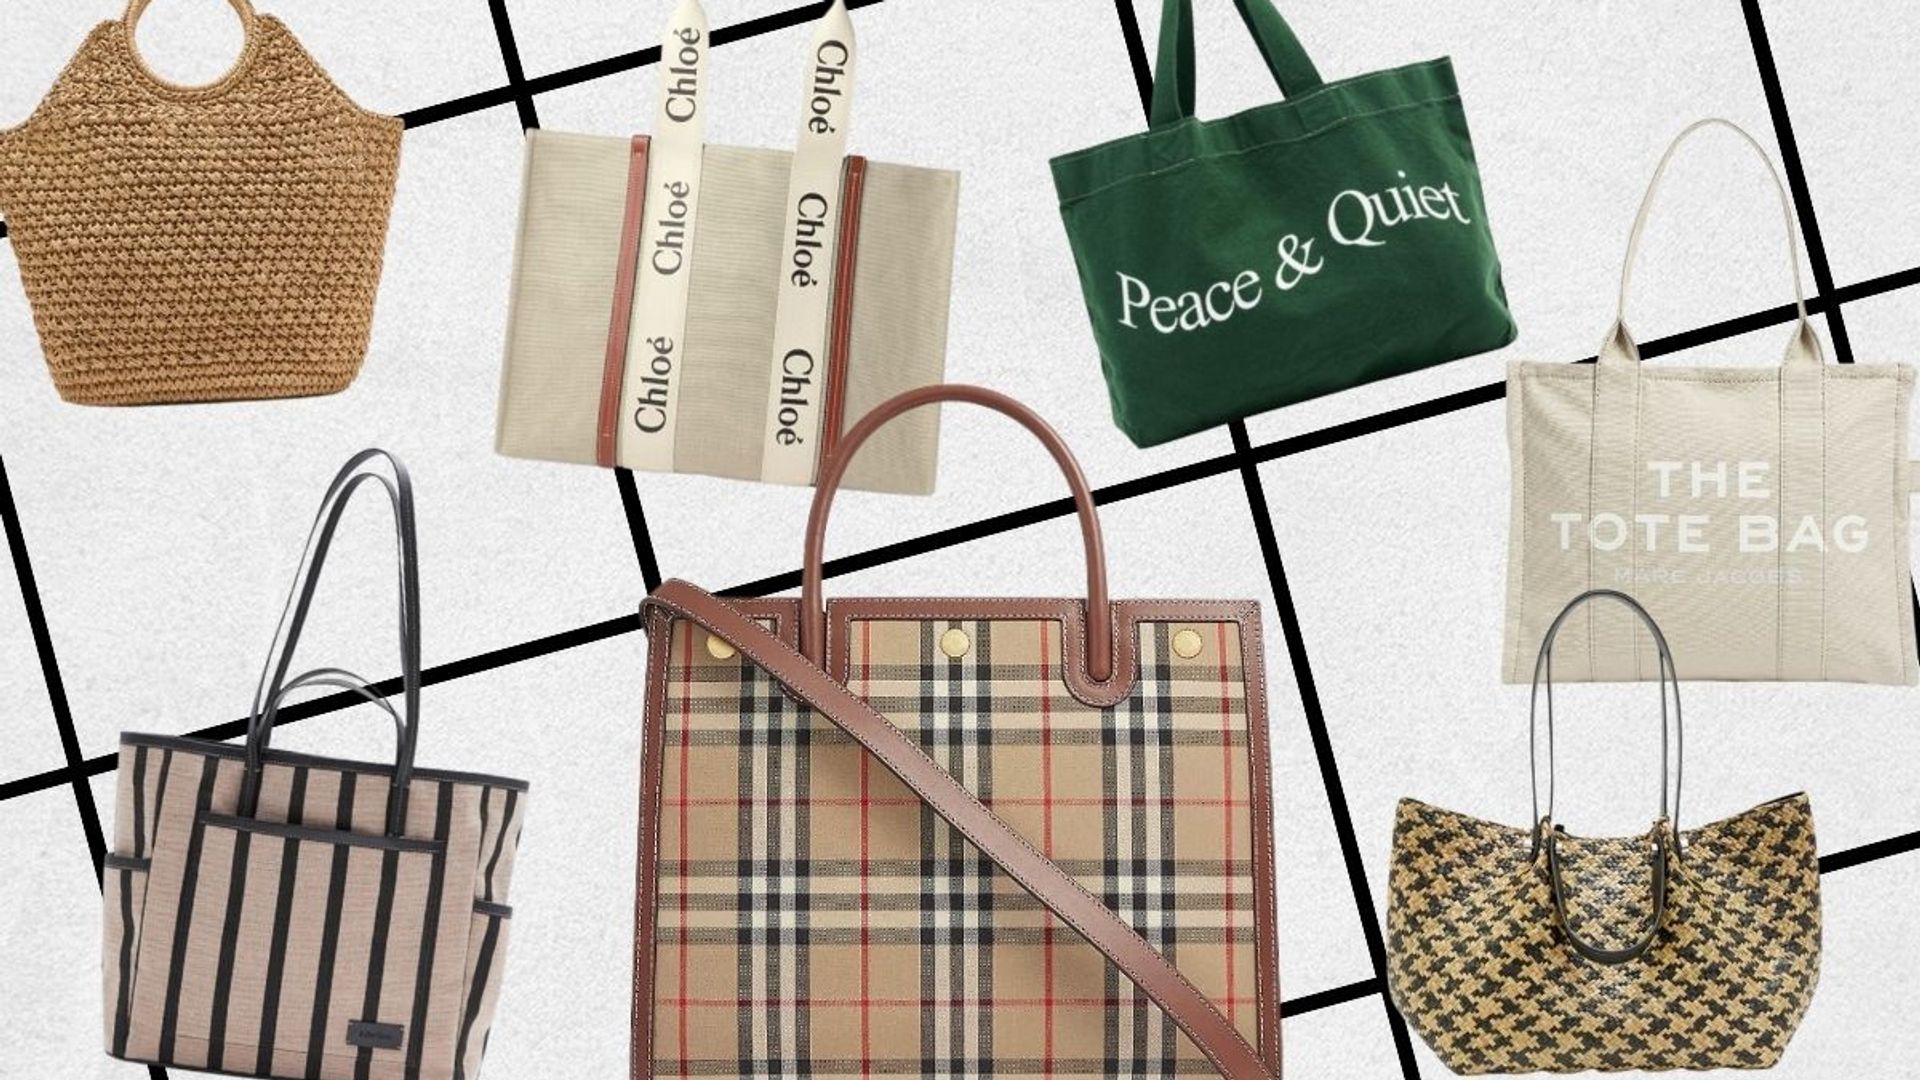 Succession's £1,850 Burberry tote bag is going viral: 7 